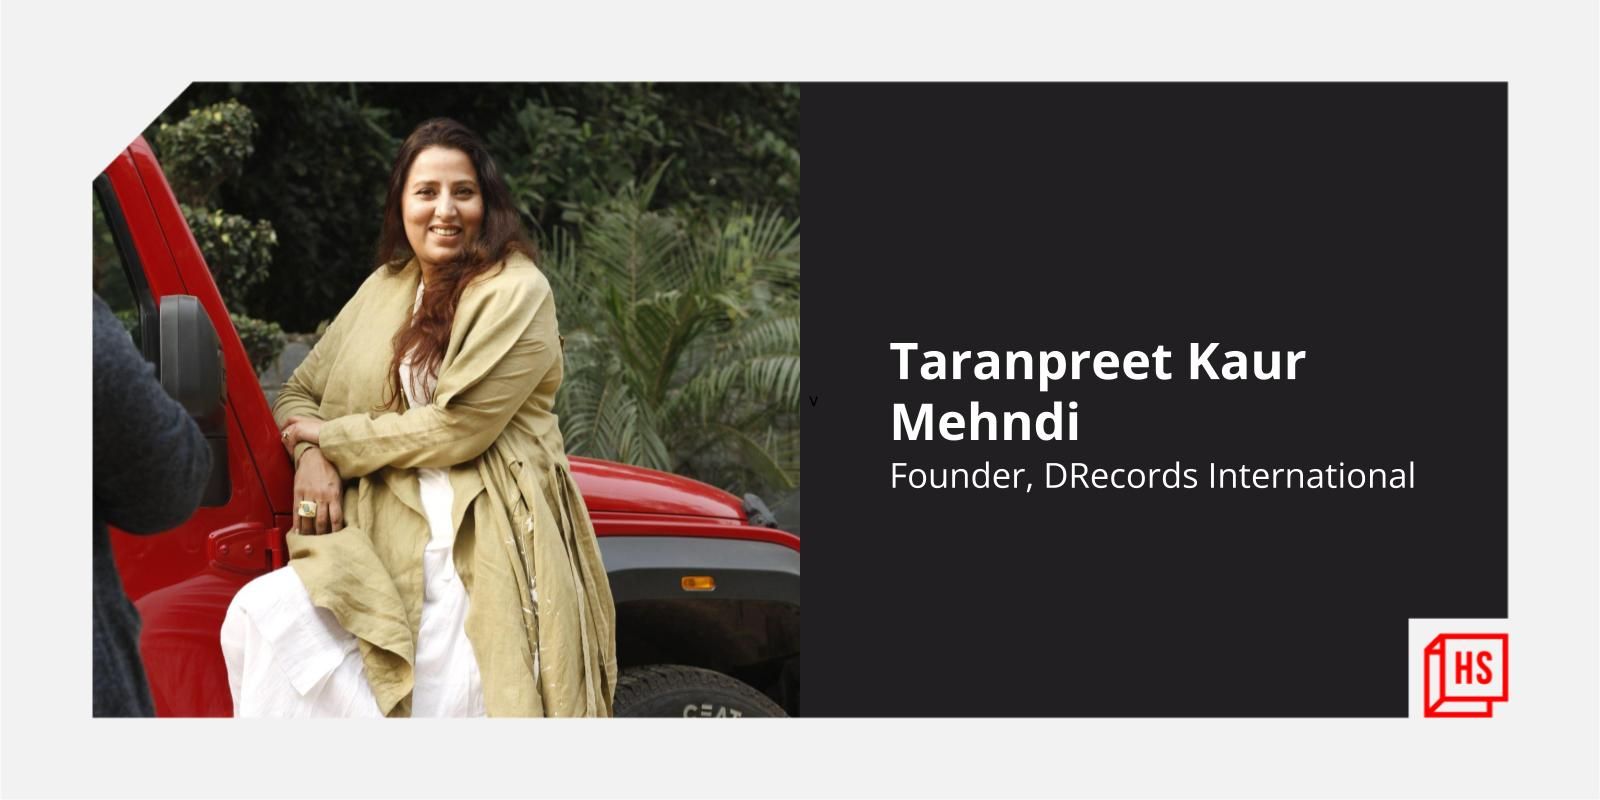 Meet the woman who stepped into the male-dominated music label industry and nailed it - Taranpreet Kaur Mehndi of DRecords International